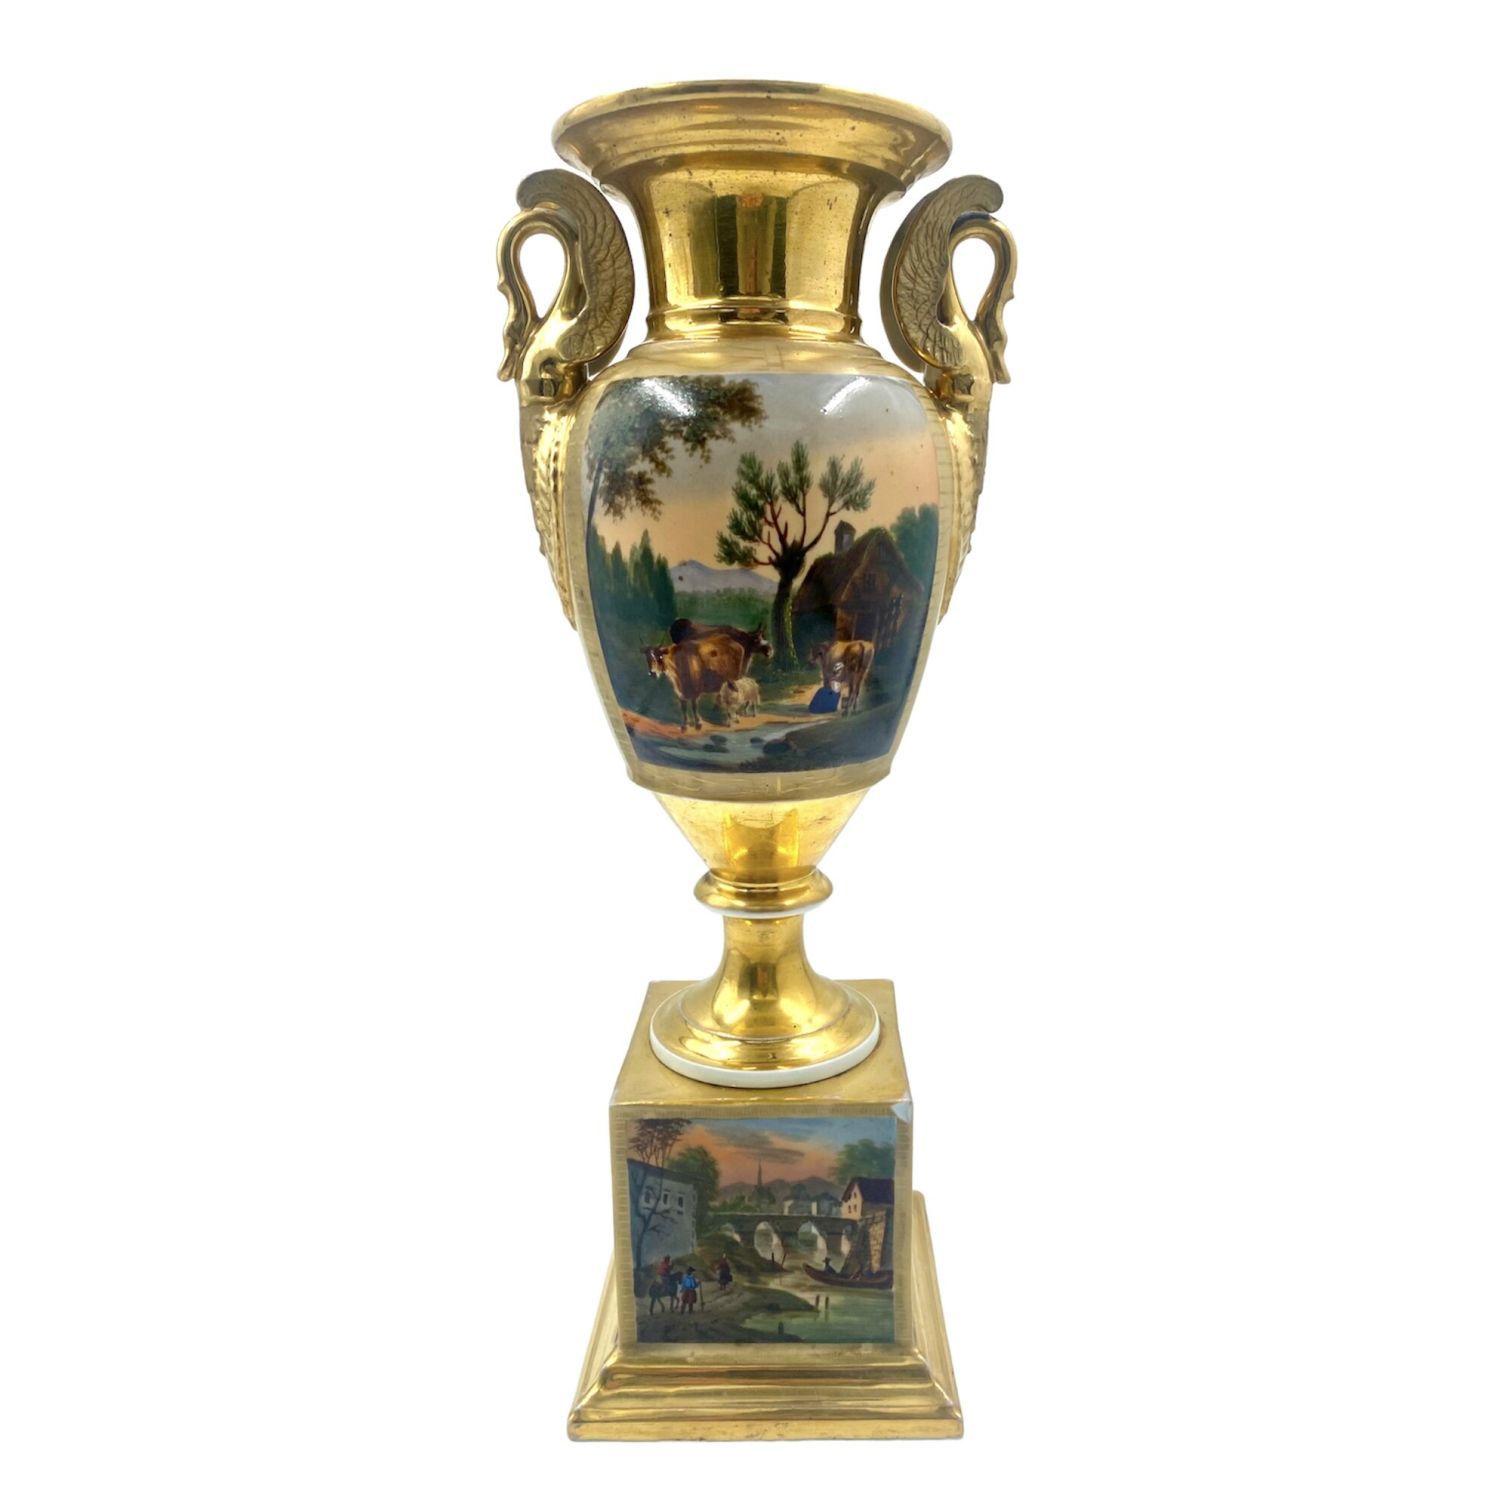 Null PORCELAIN VASE ON FOOT, PARIS, 19th CENTURY
decorated with animated landsca&hellip;